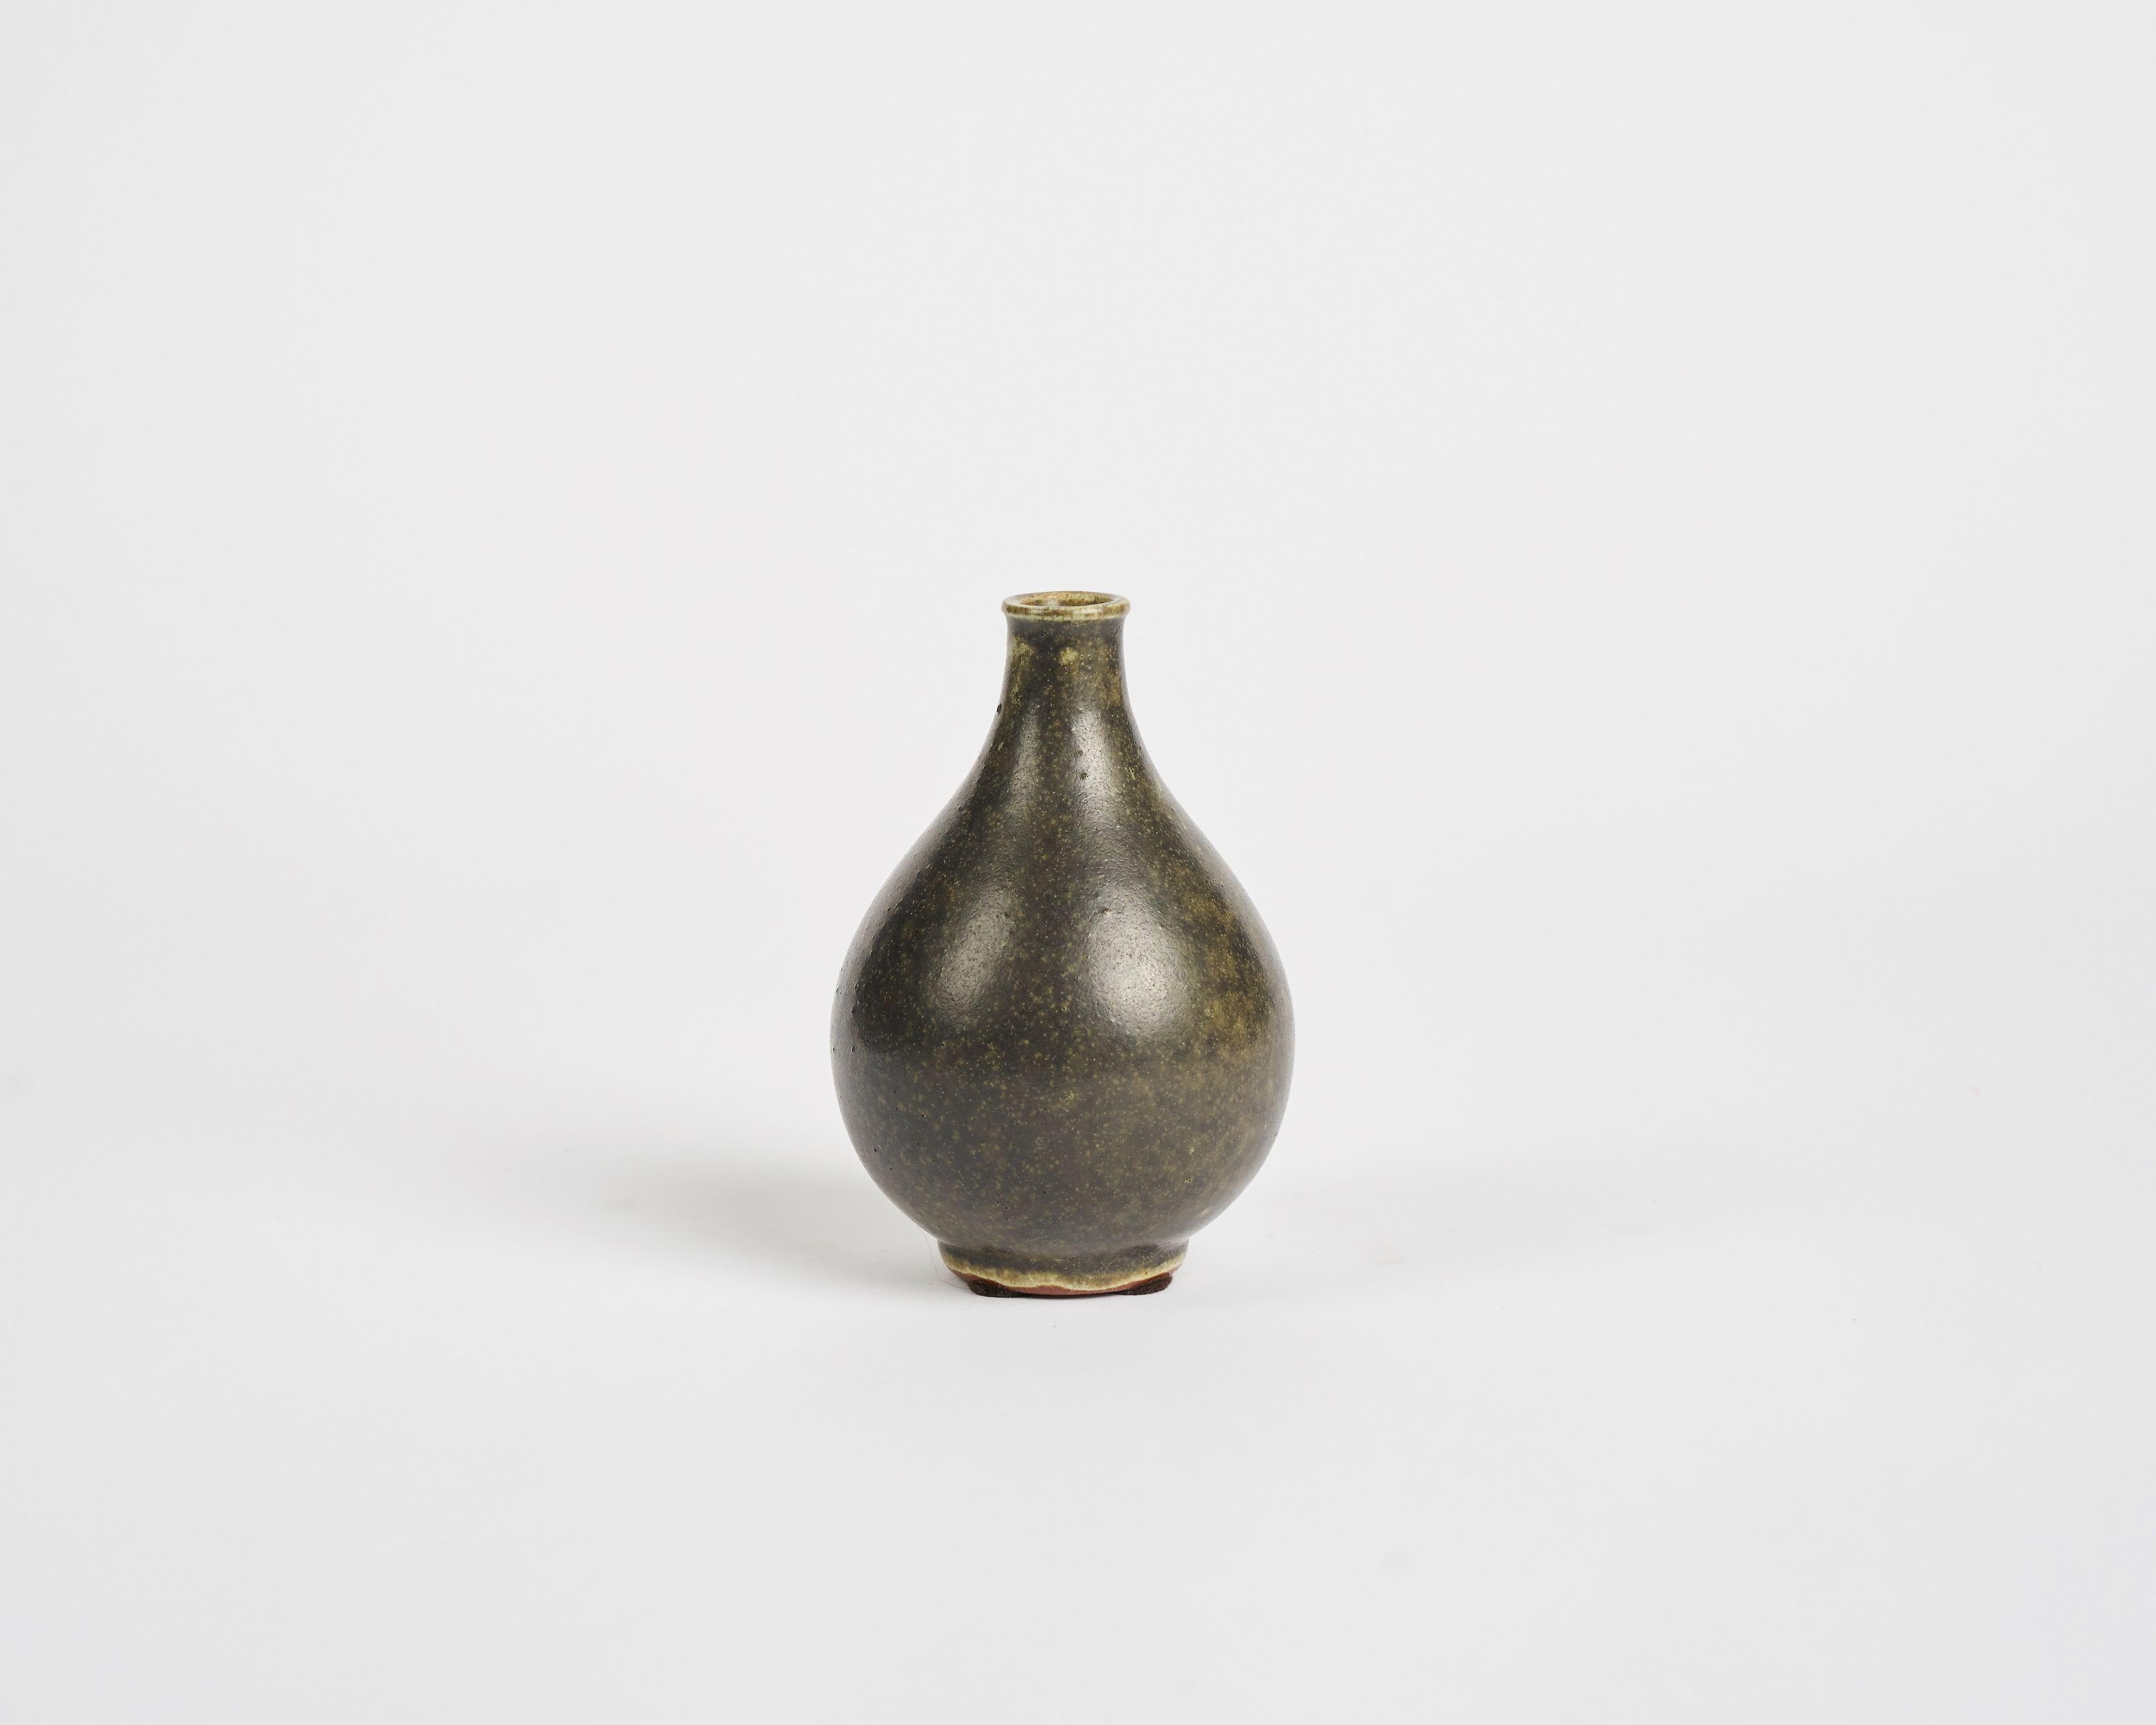 Glazed stoneware vase in green and grey tones by Arne Bang.

Signed: AB
Numbered: 71.